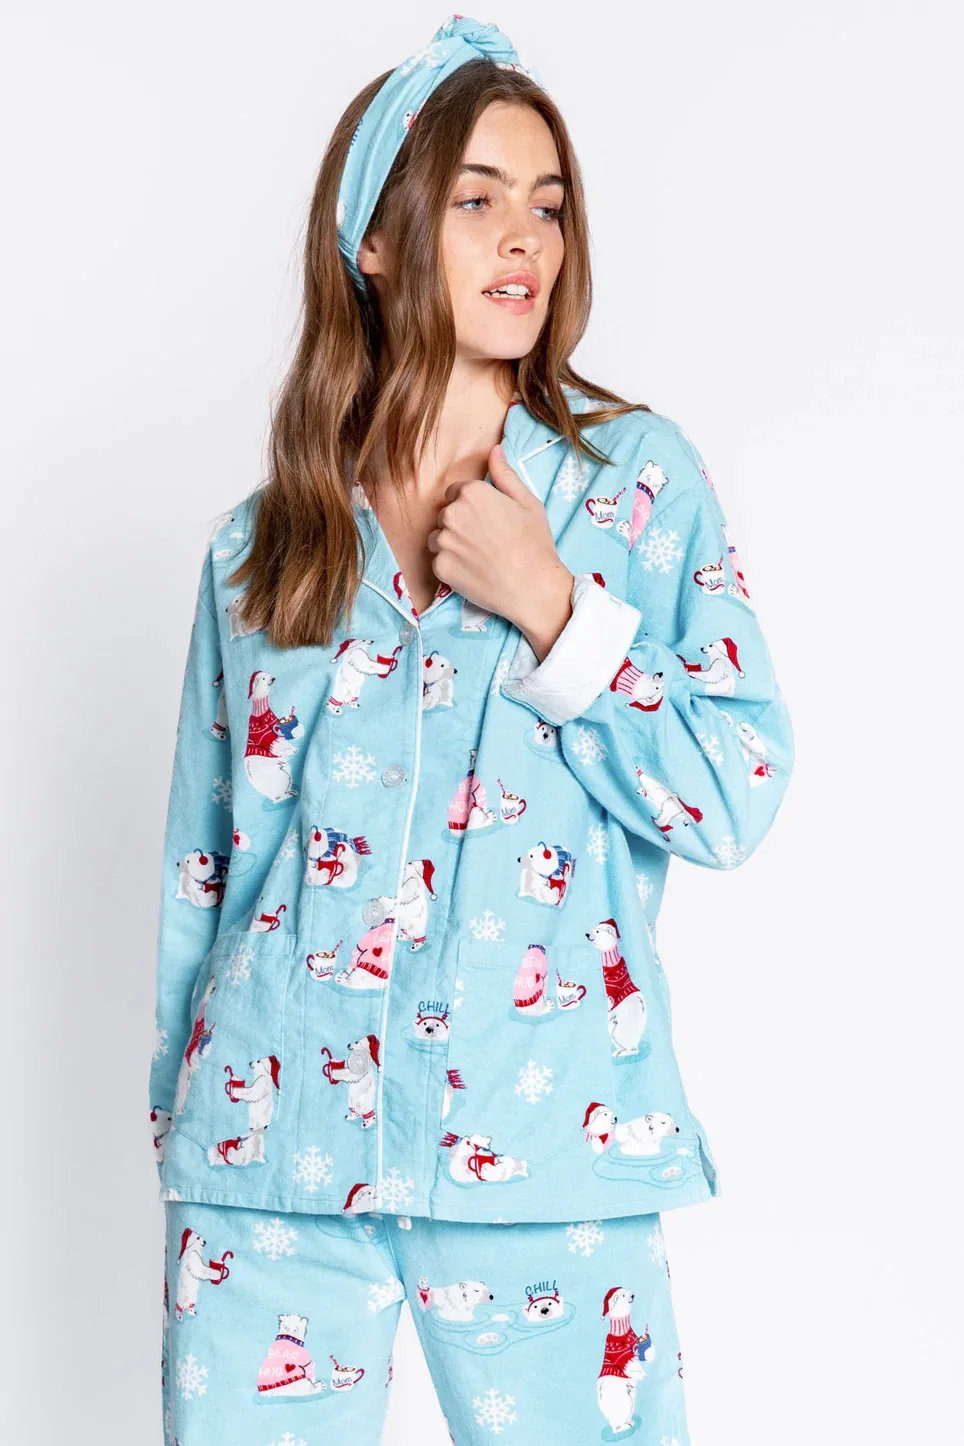 Room Wear Ladies Pajamas Women Home Sleepwear Long Sleeve Trousers Set Autumn and Winter Warm Thick Cotton 2021spring and autumn women s pajamas round neck long sleeve loose large size home wear pajamas for women sleepwear sleep tops